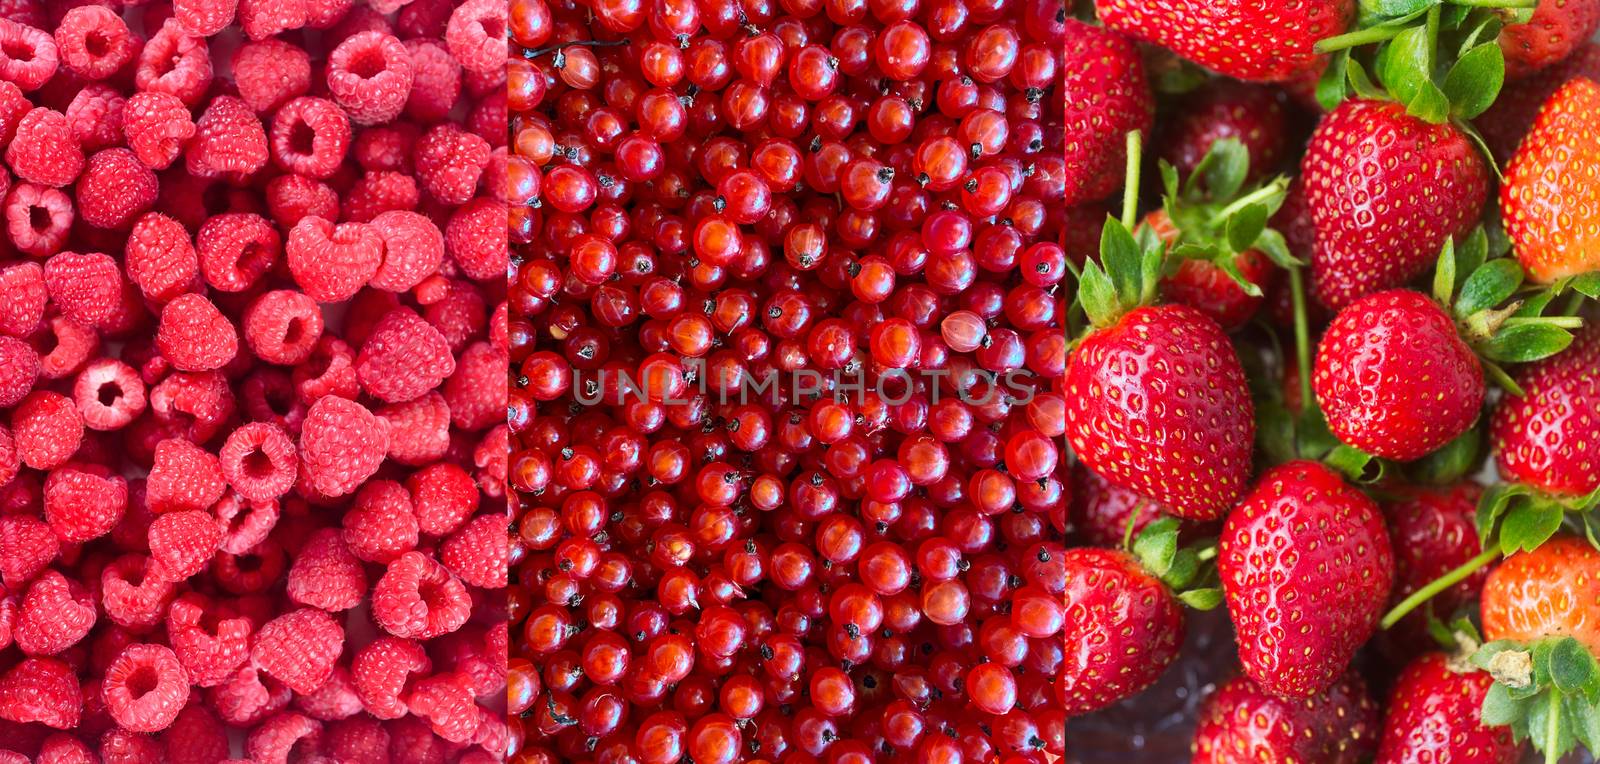  red berries currant, raspberry and strawberry Natural backgroun by Margolana